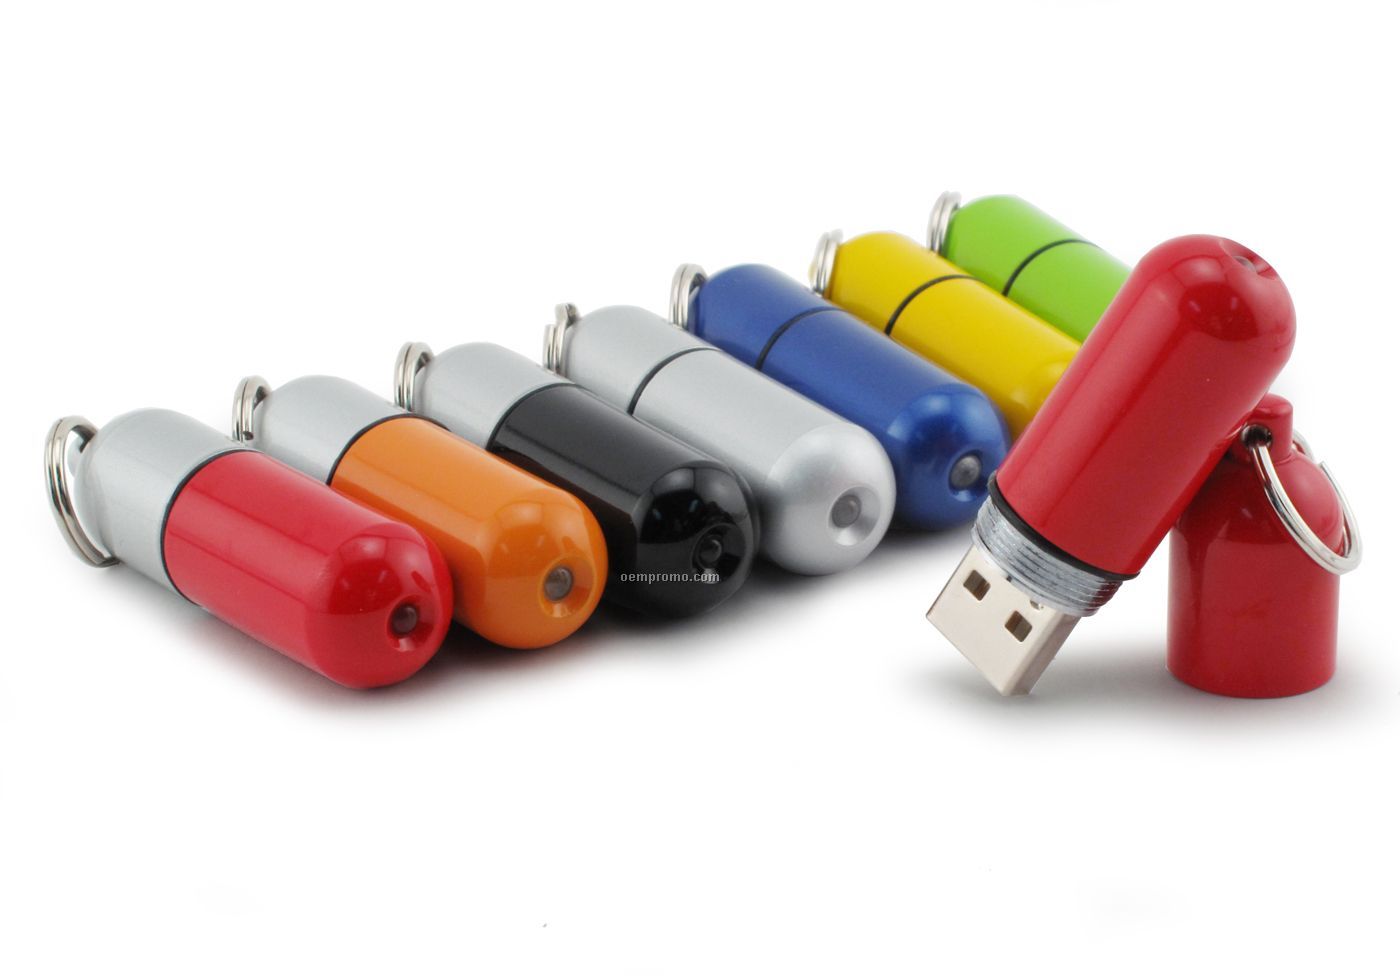 1 Gb Specialty 300 Series USB Drive - Capsule